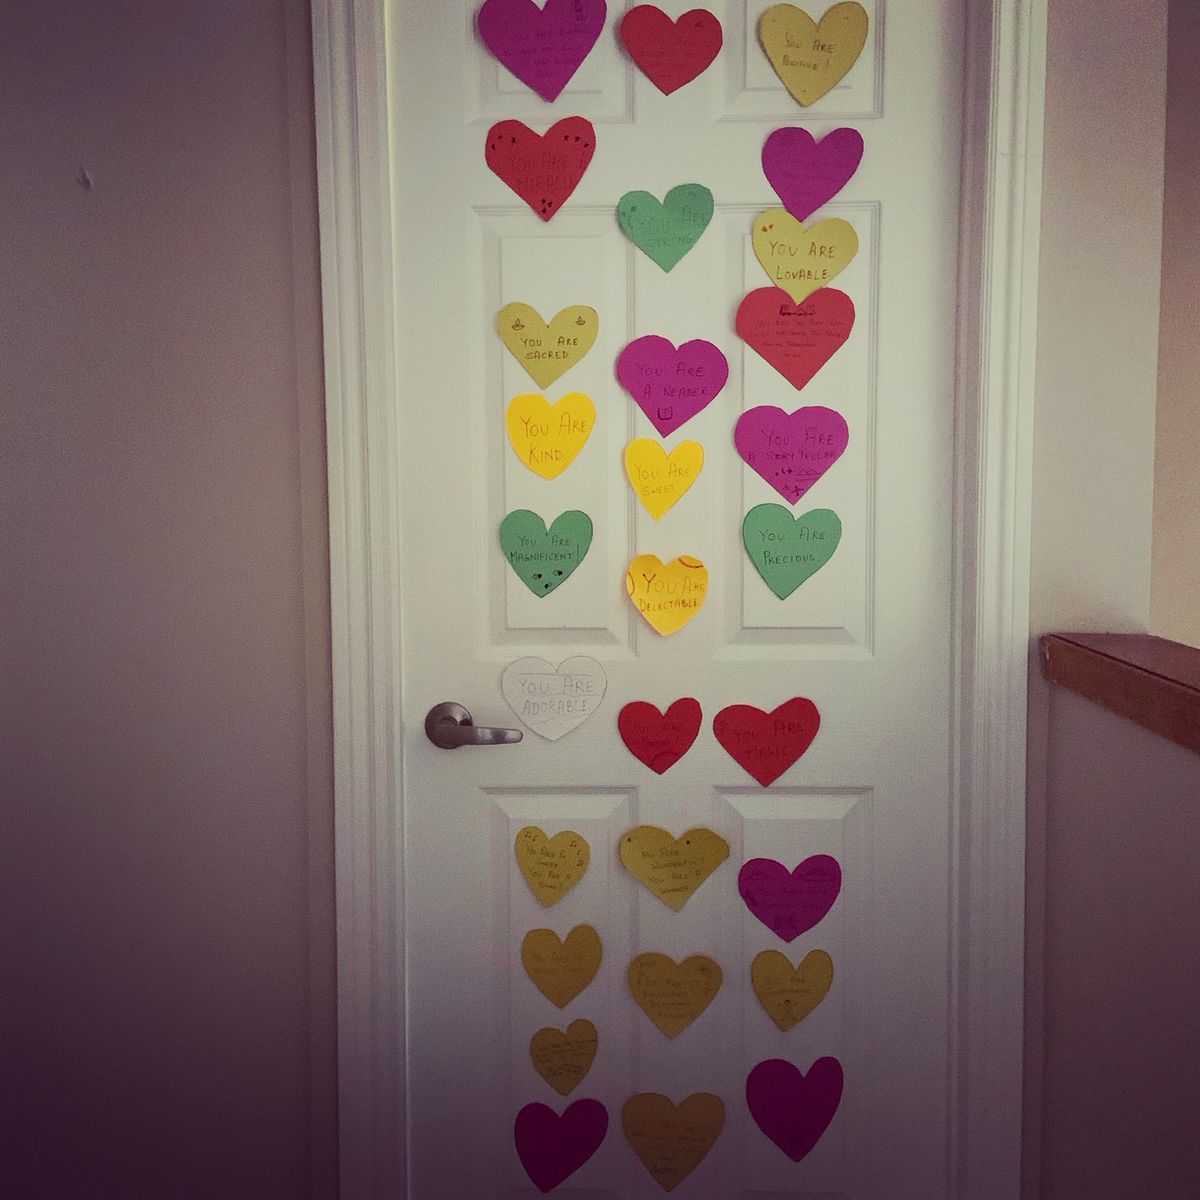 tales for dreamers: a door of hearts